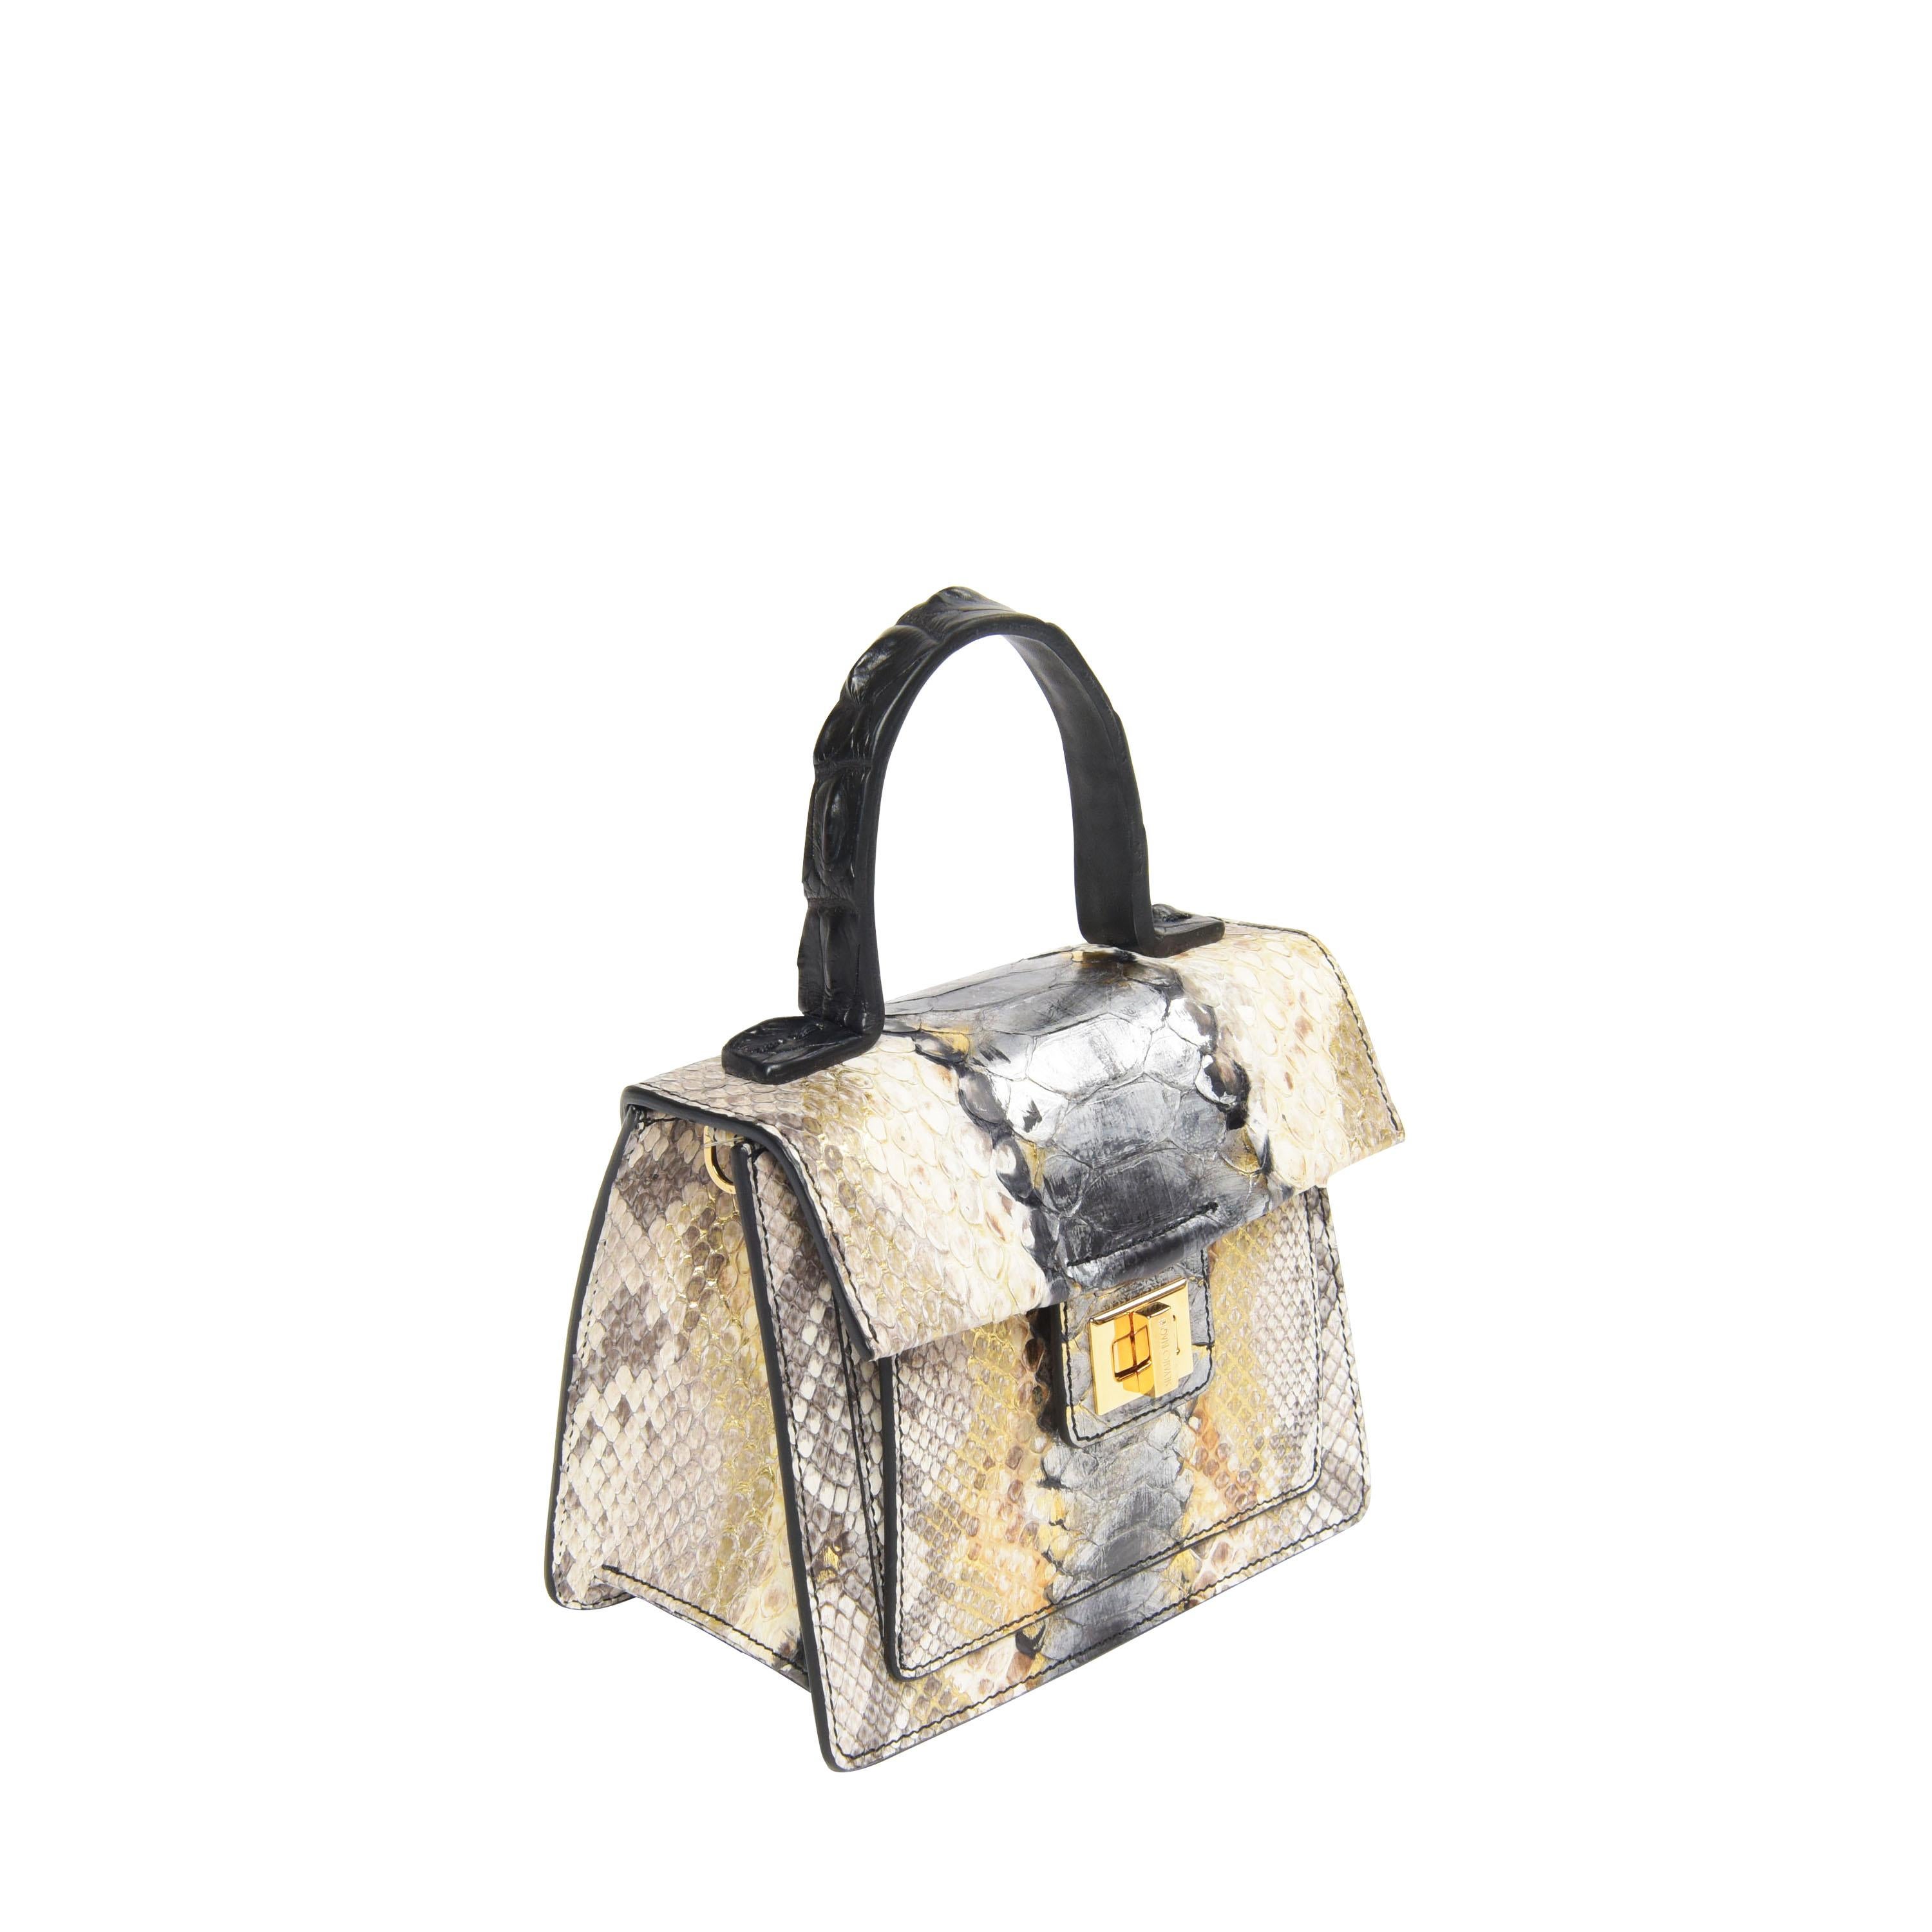 Mini Kandie bag in matte python and alligator handle with adjustable strap, comes with frontal storage space and inner pocket. The bag is completed with KRENOIR's signature enameled lock

Measures 7